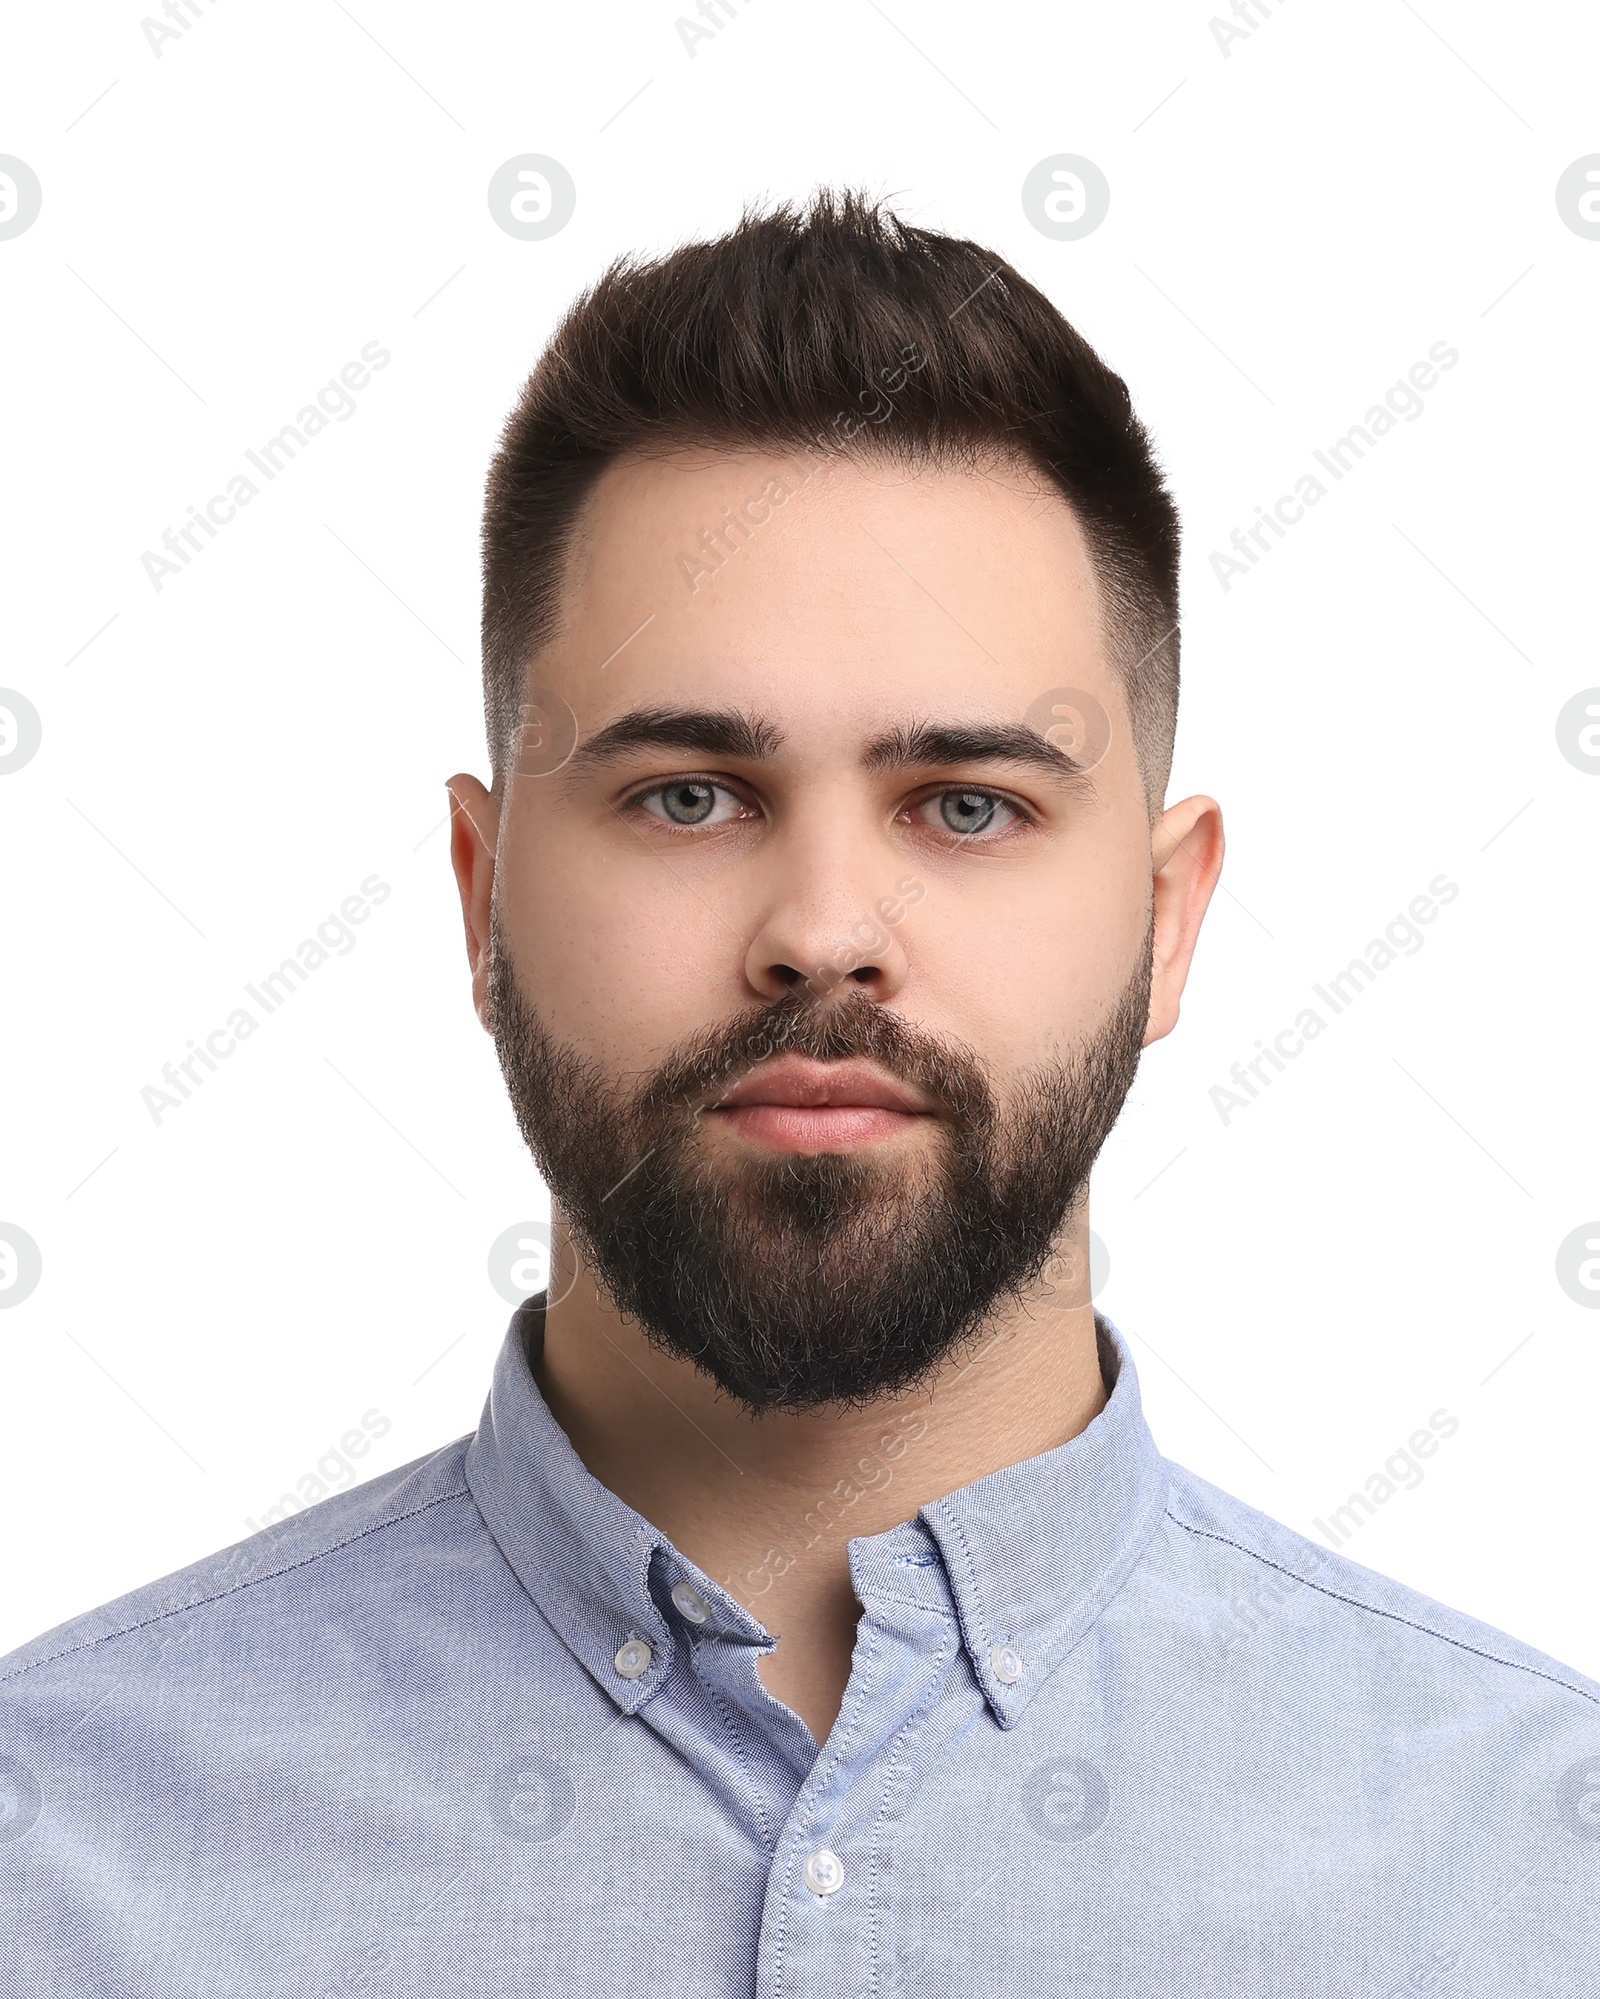 Image of Passport photo. Portrait of young man on white background